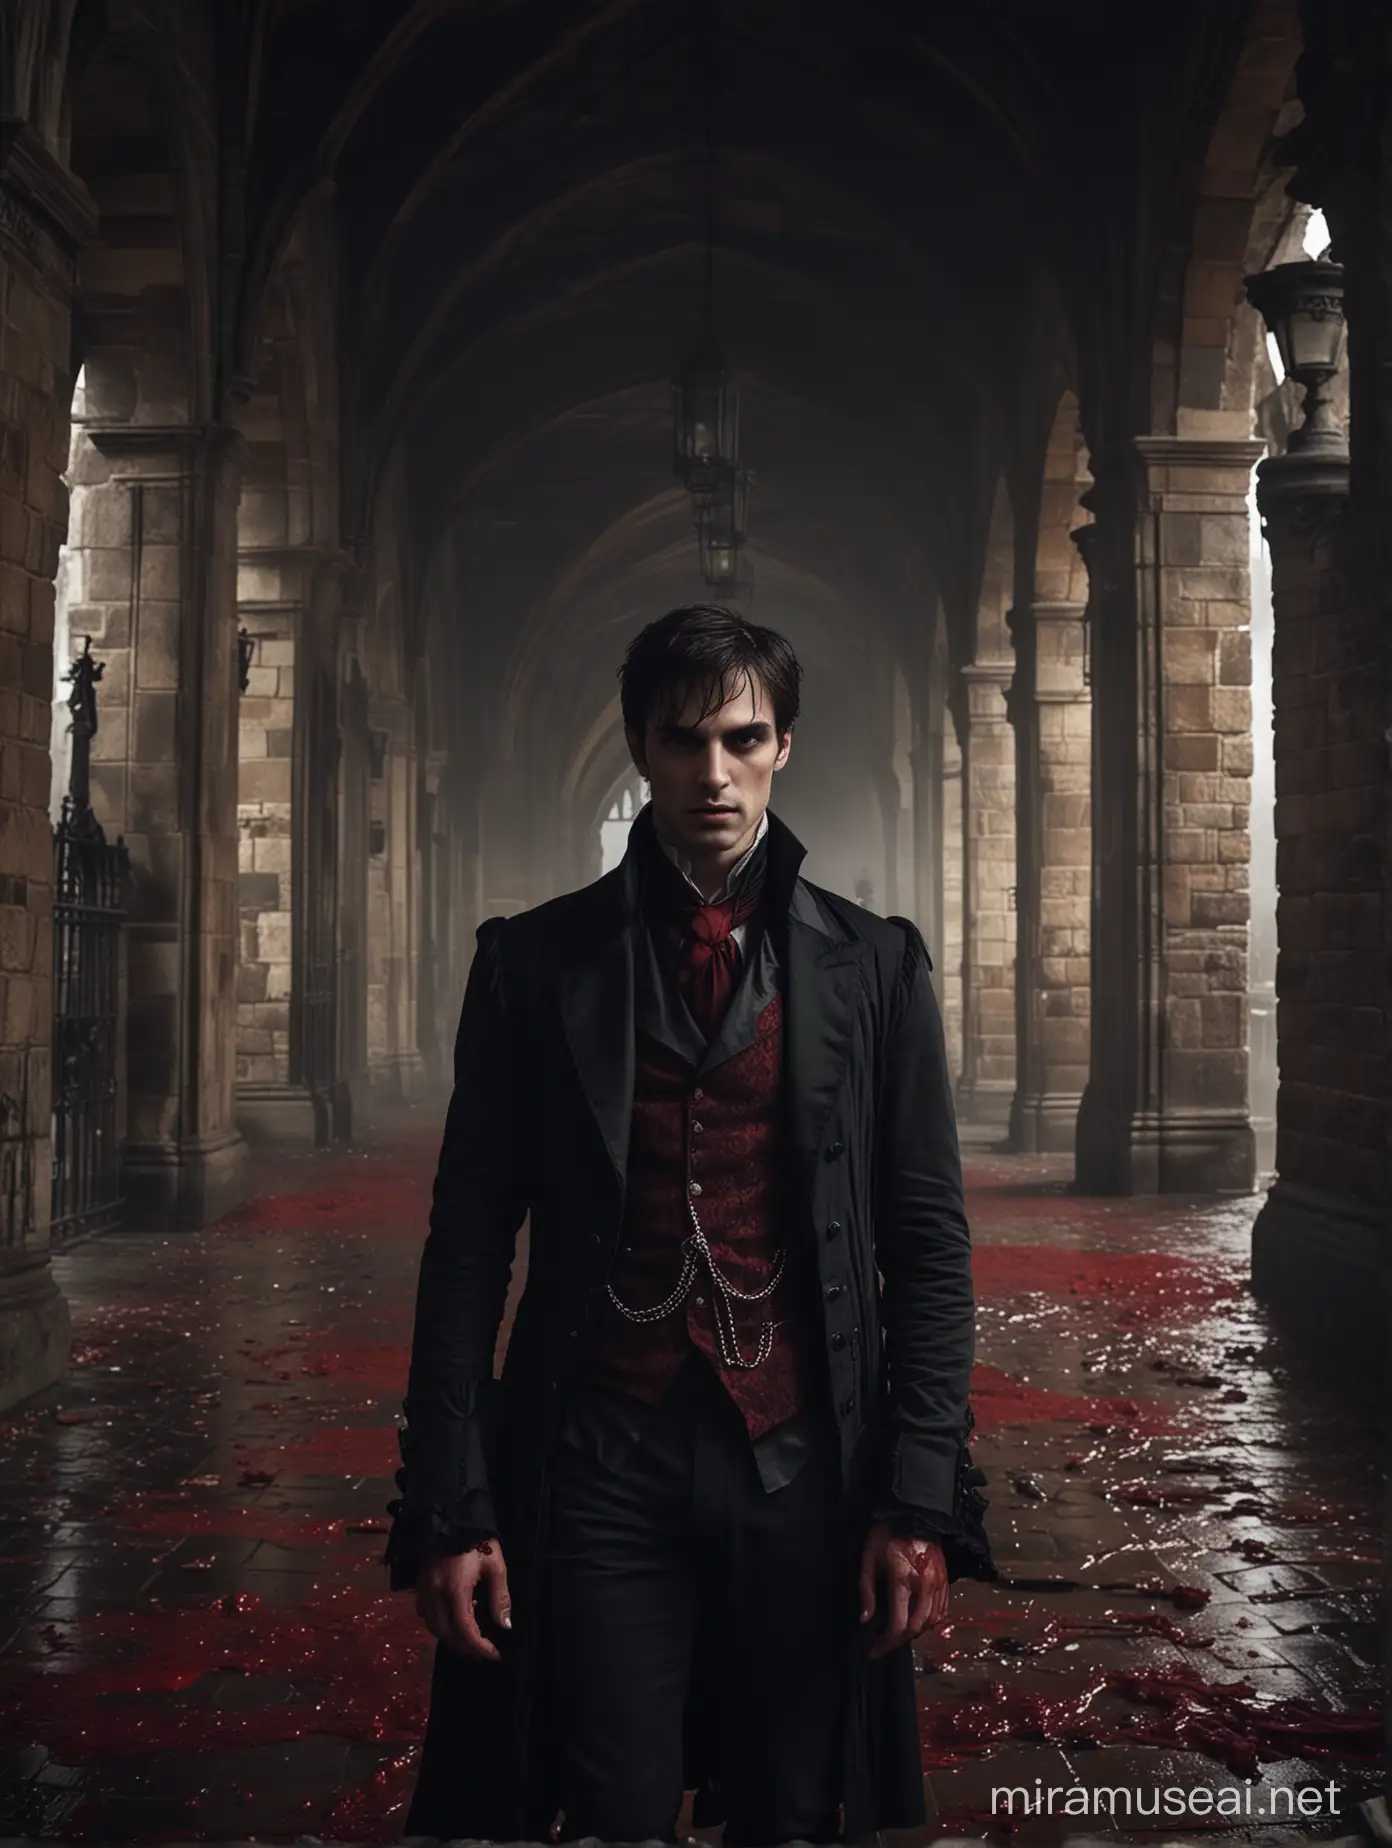 Mysterious Victorian Vampire in a Gothic Castle